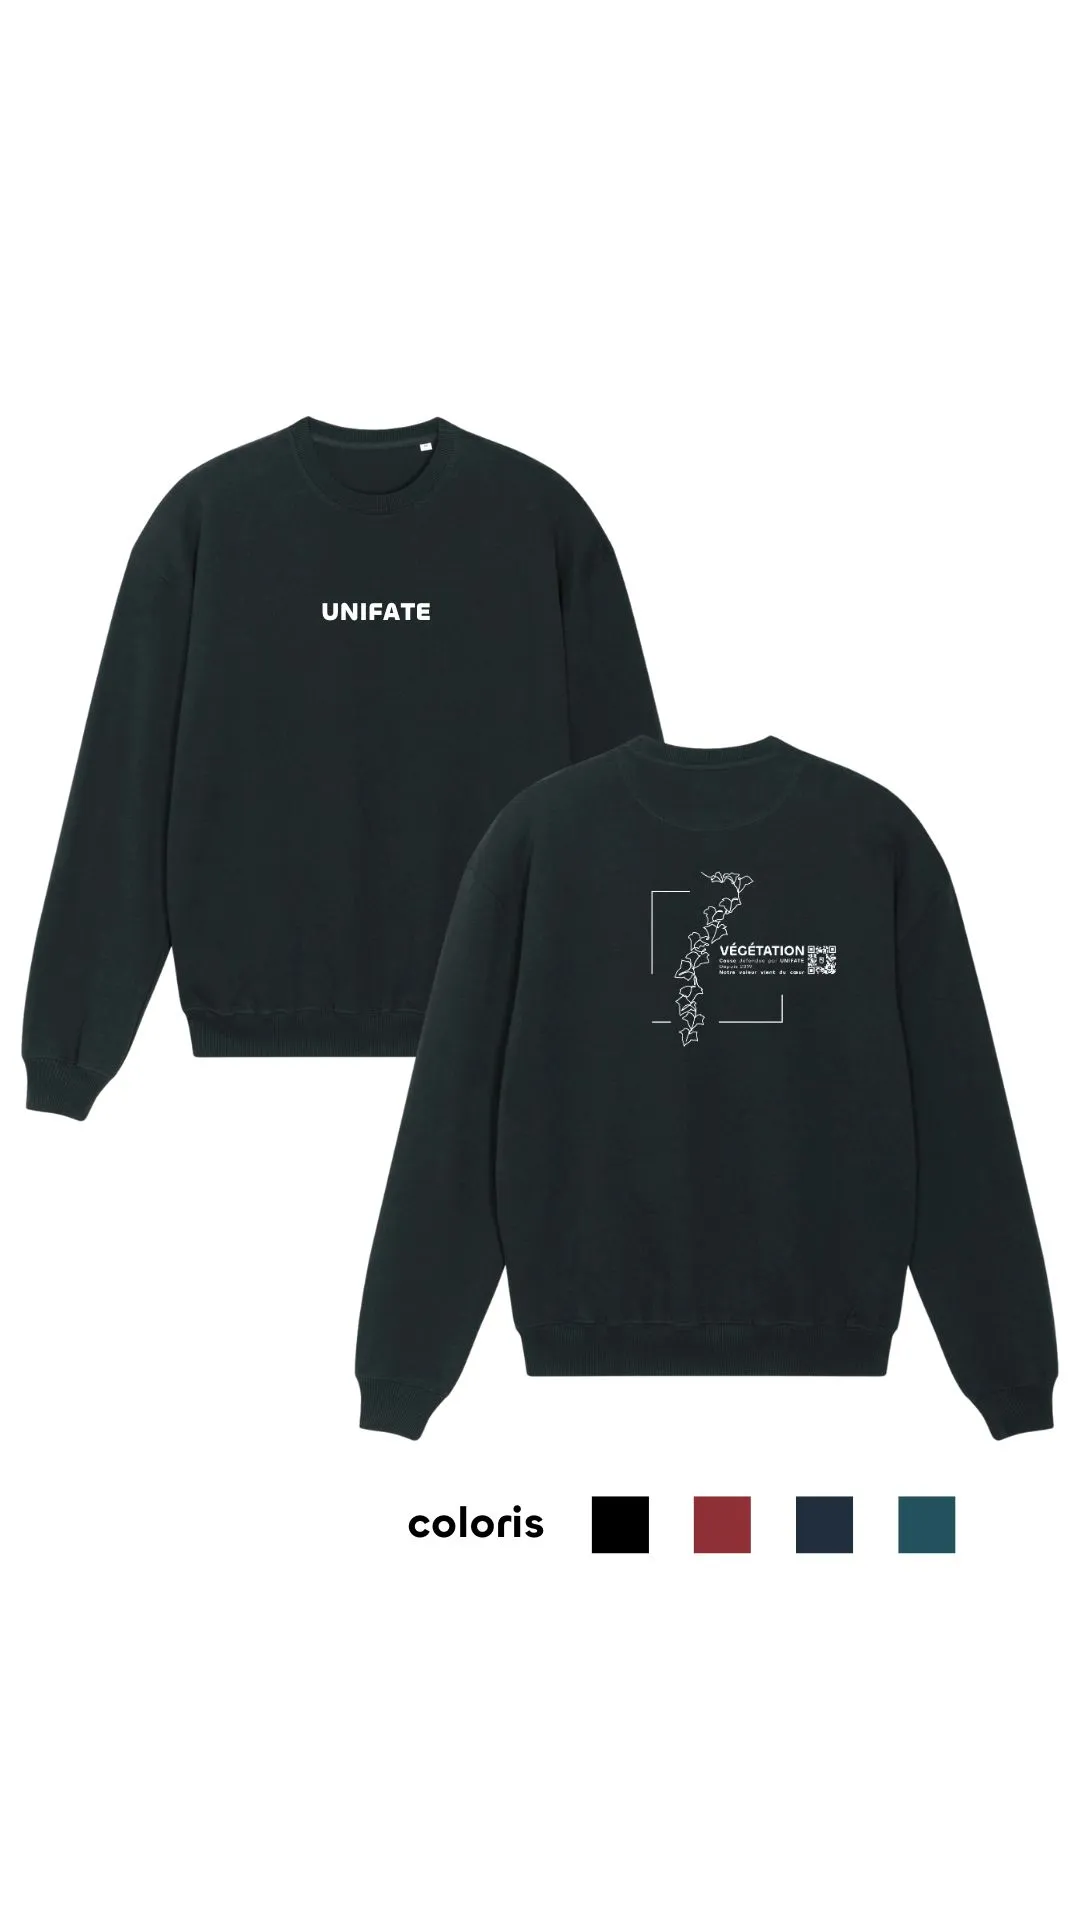 unifate-marque-responsable-rennes-collection-flore-ete-sweat-turquoise